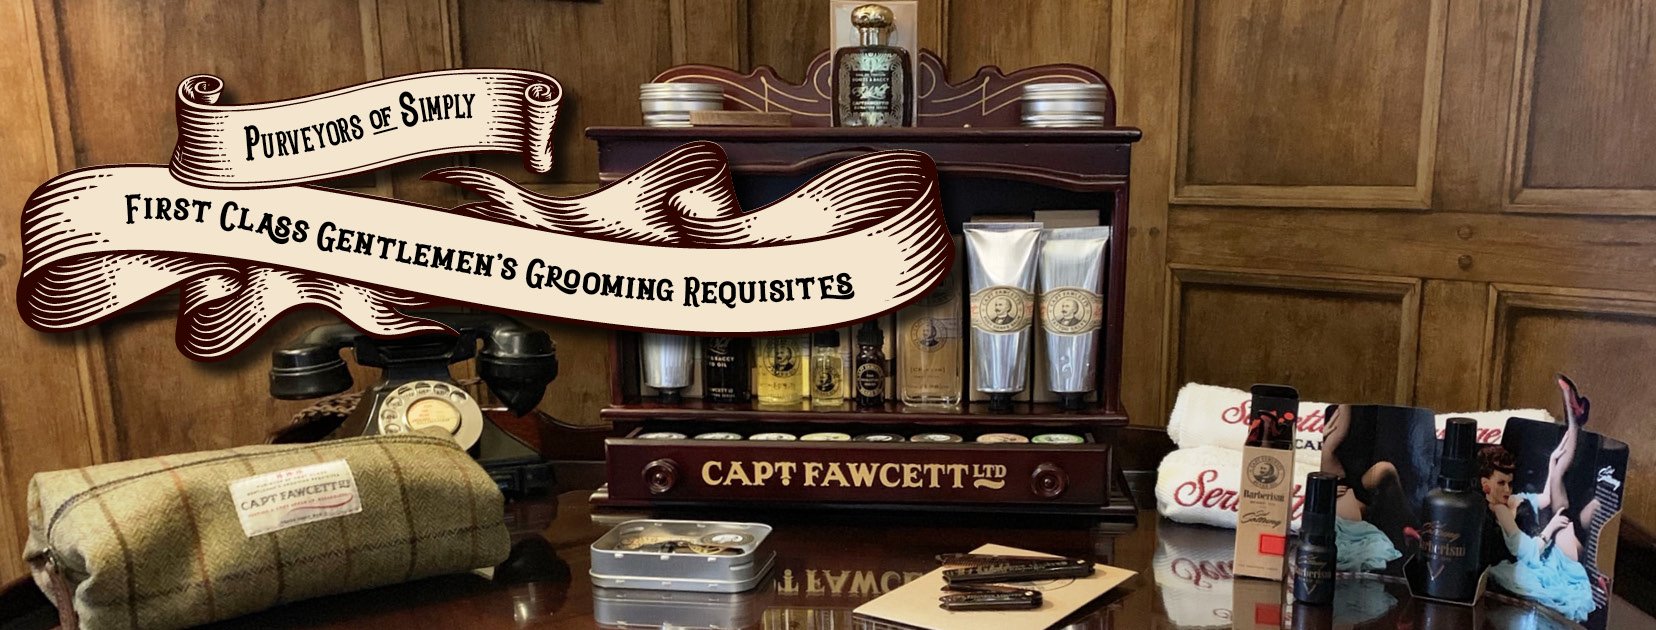 Captain Fawcett products at West Man Barbershop Aberdeenshire